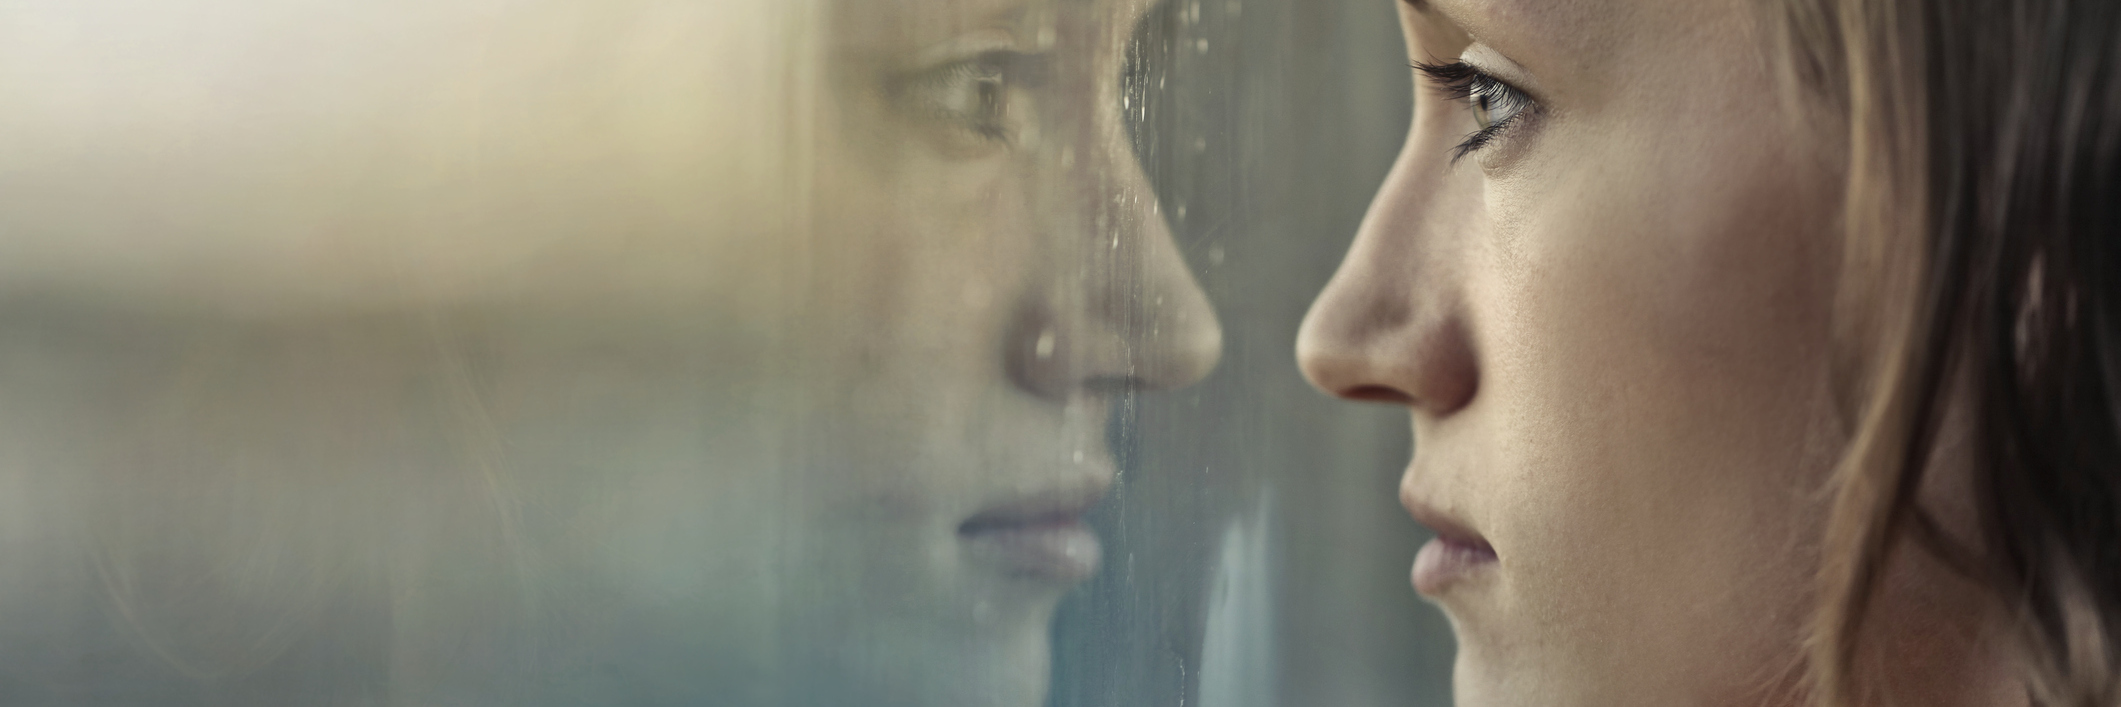 young woman looking through window with rain